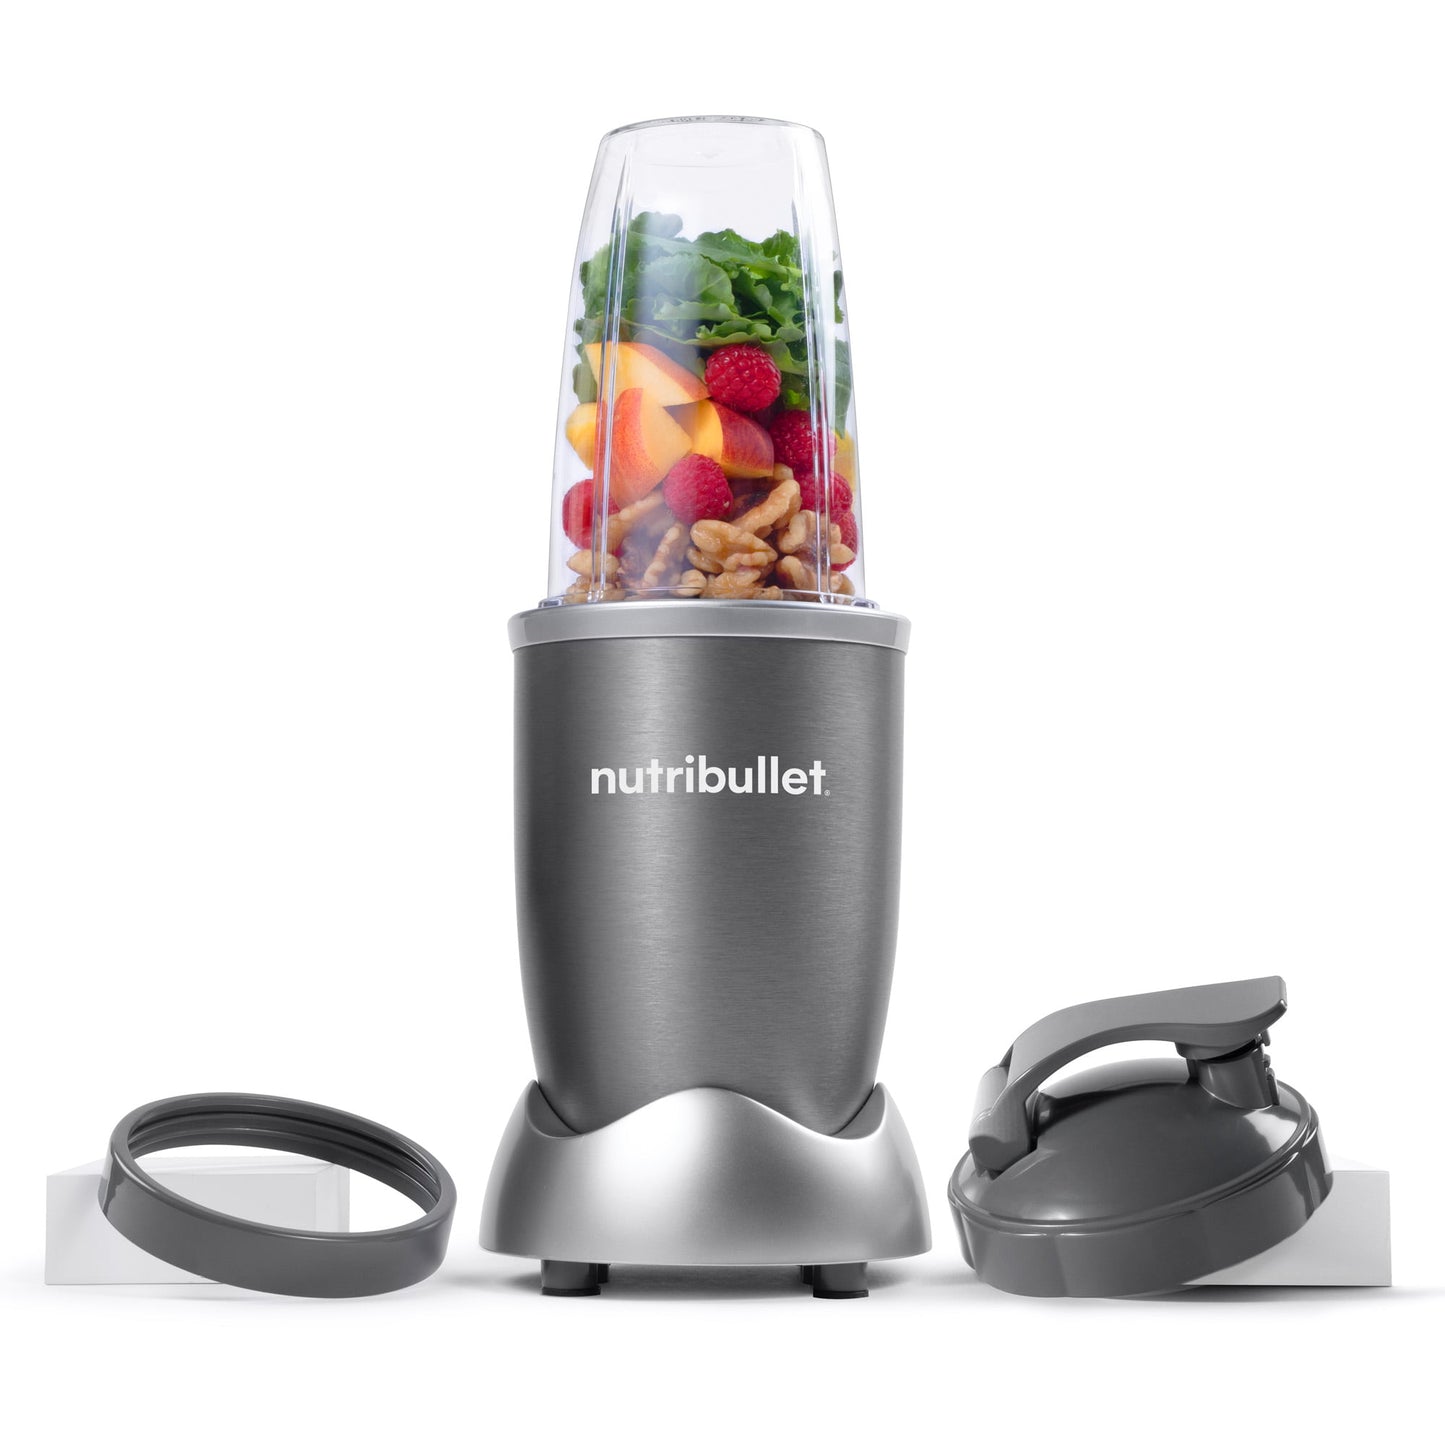 Blend Your Way to Health: Discover the NutriBullet 600 Watt Personal Blender